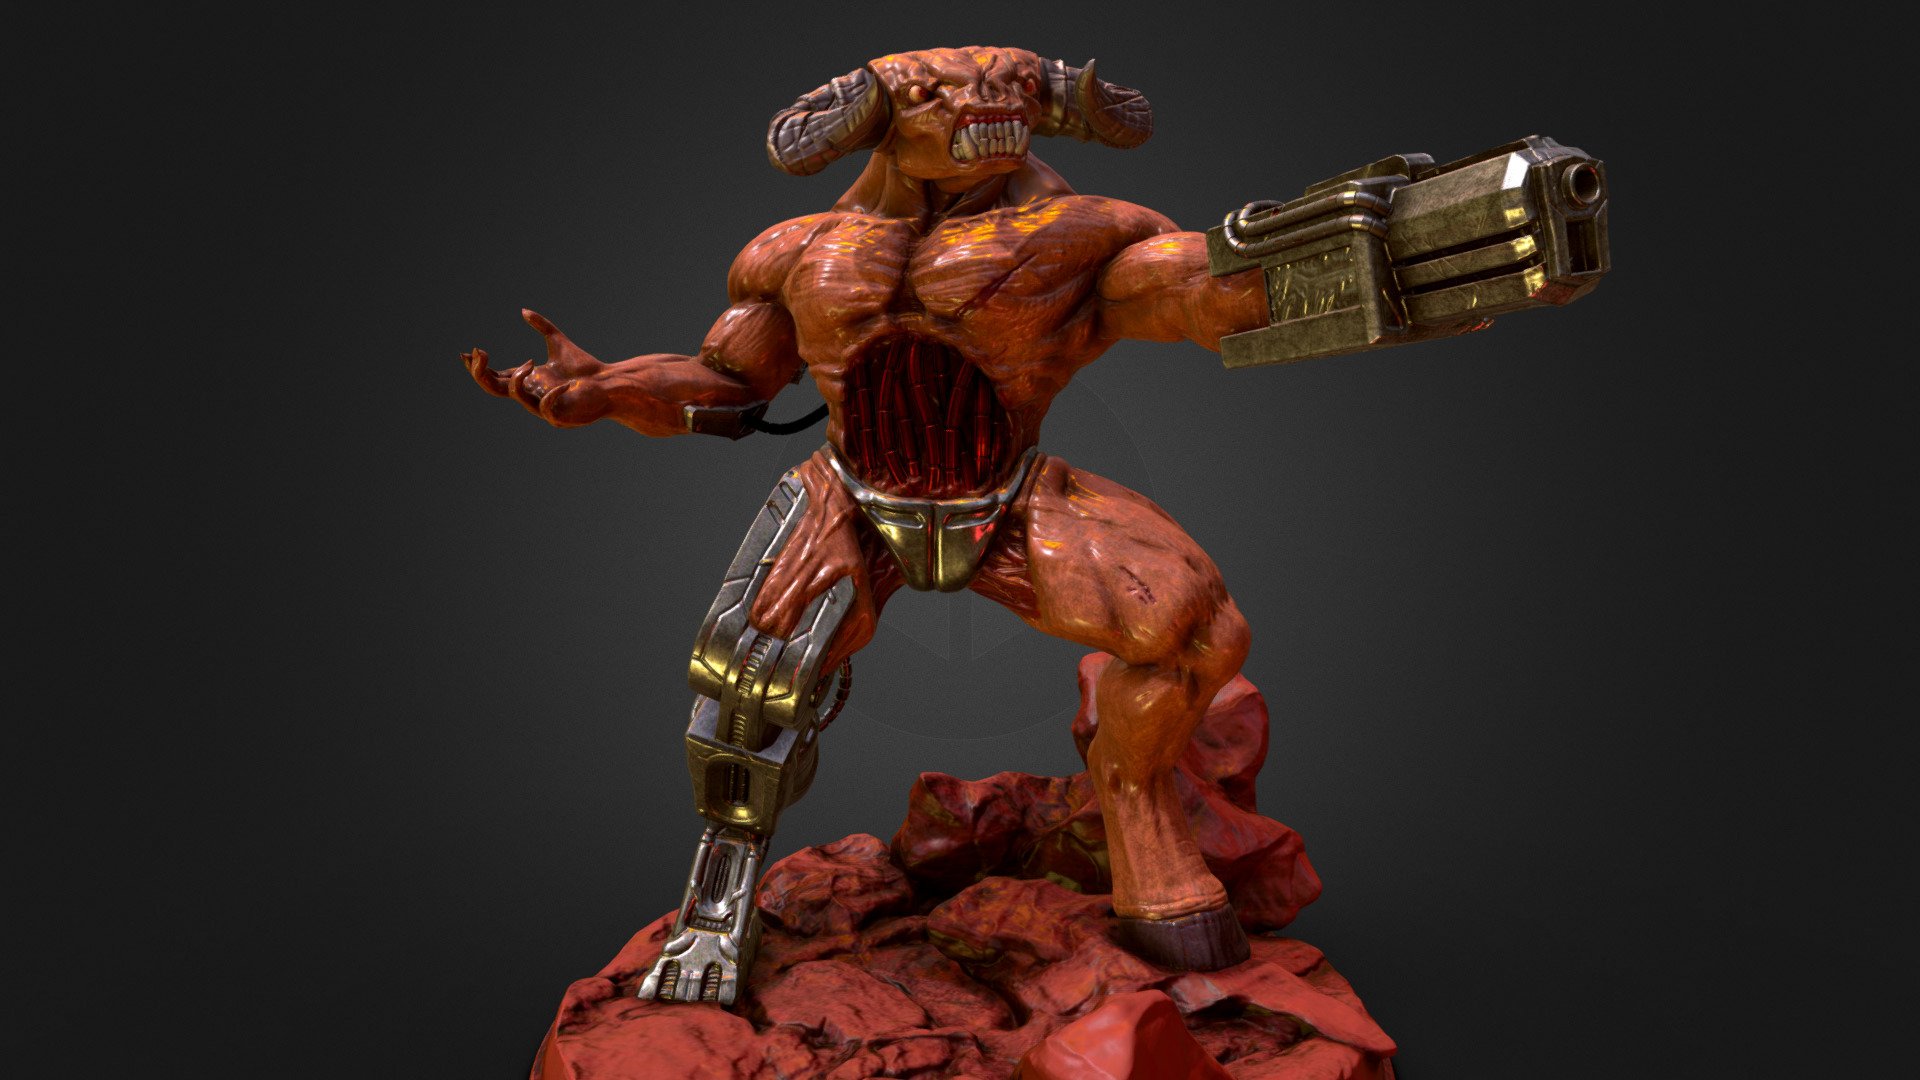 This is my sculpture of a modern interpretation of the Cyberdemon boss from the classic Doom. 
I used some old Doom concept drawings for reference and tried to addapt the sprite work into something more modern.
The original high resolution model was made for 3d printing, I added some color and used the high resolution meshes to make the normals in this 3d model